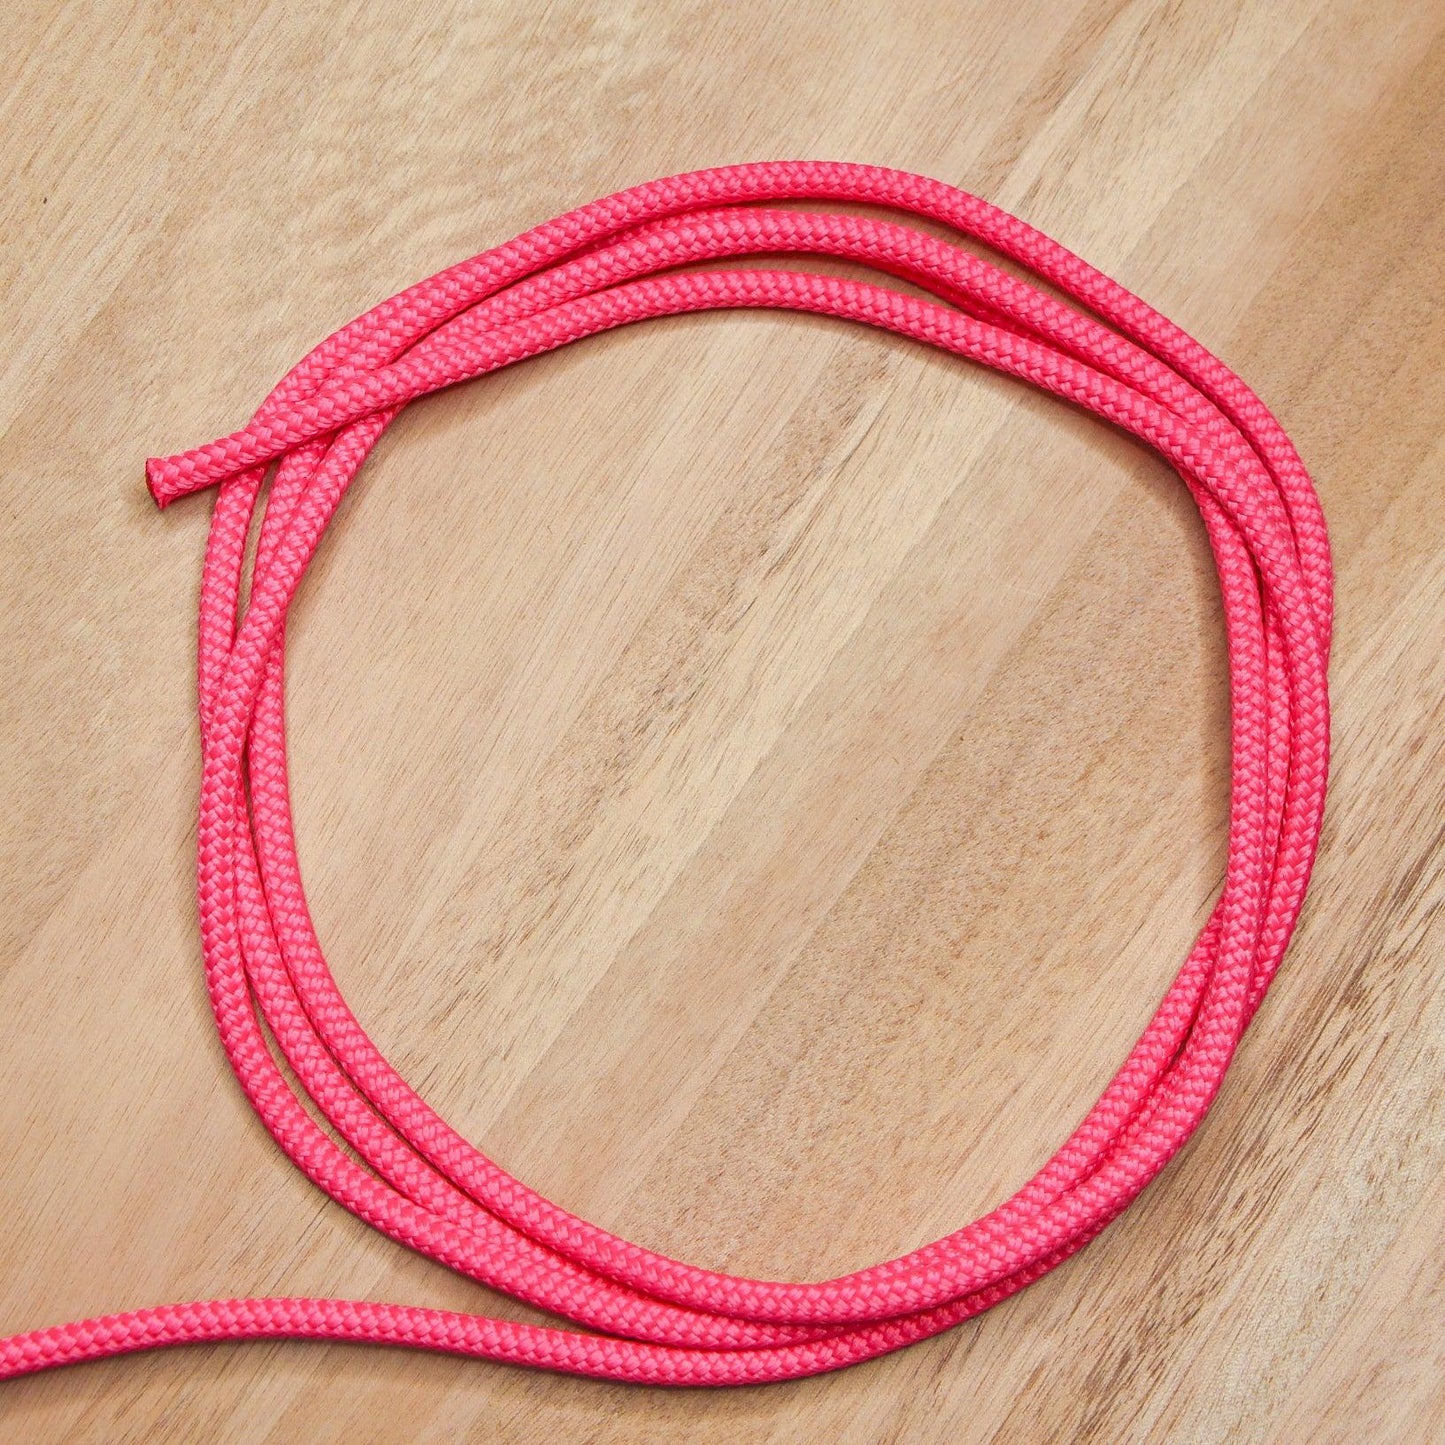 Marine Rope - Pink - 6mm - Cams Cords